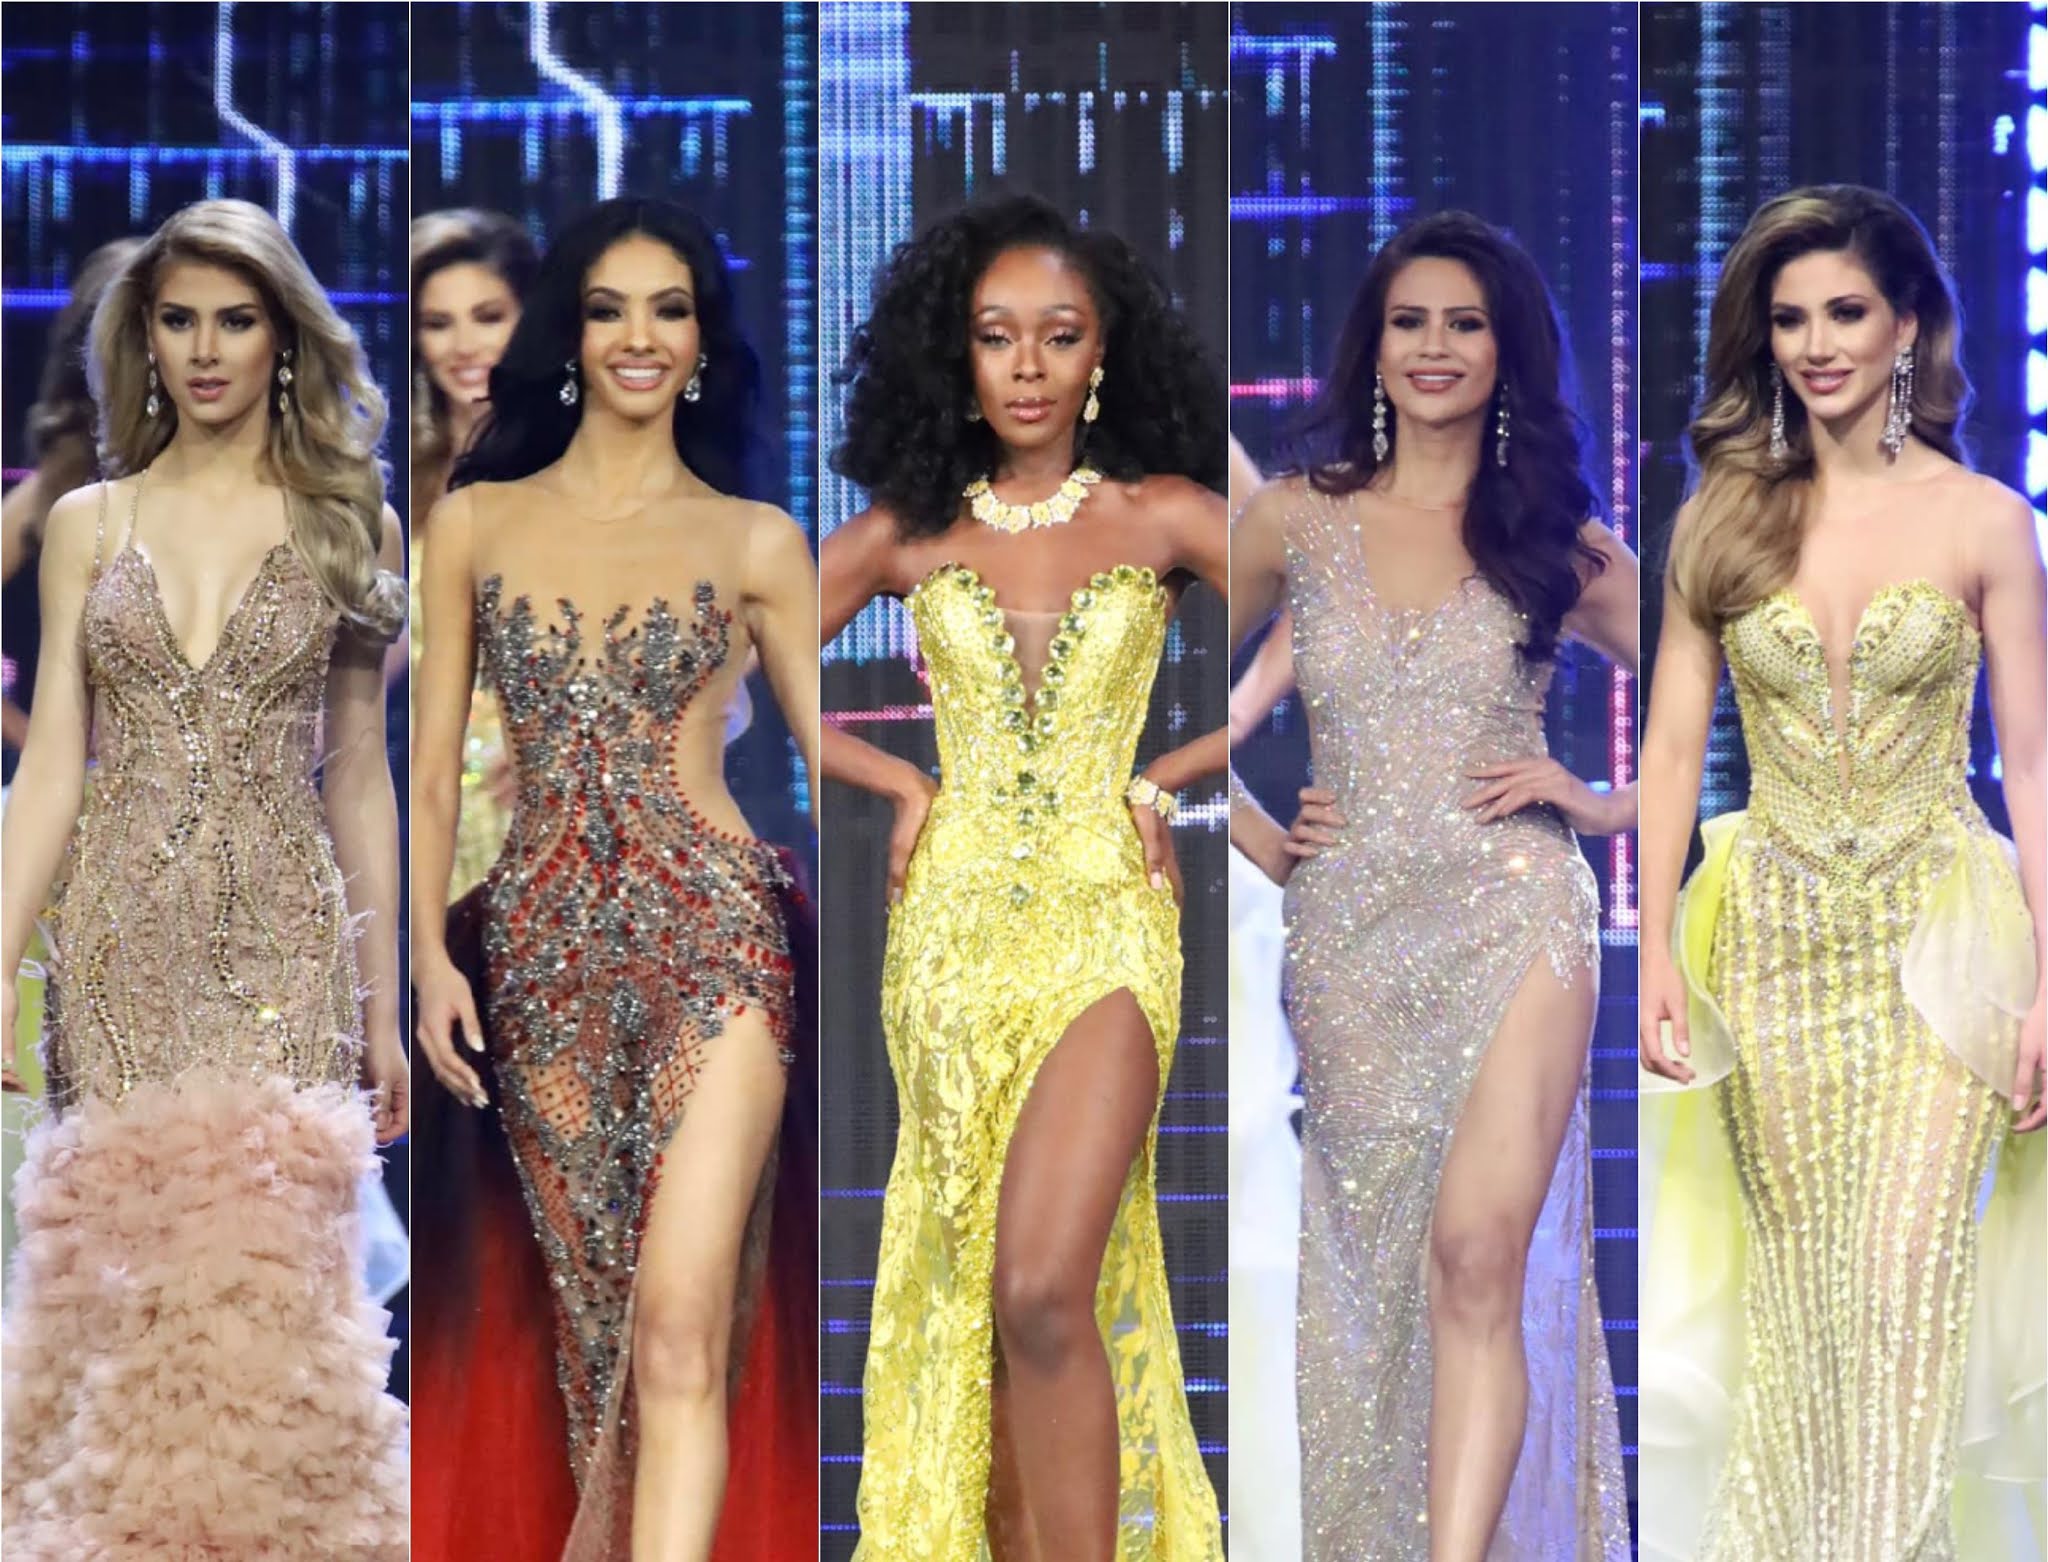 Look: Stunning Evening Gowns Worn By Miss Universe 2020 Top 10 | Preview.ph